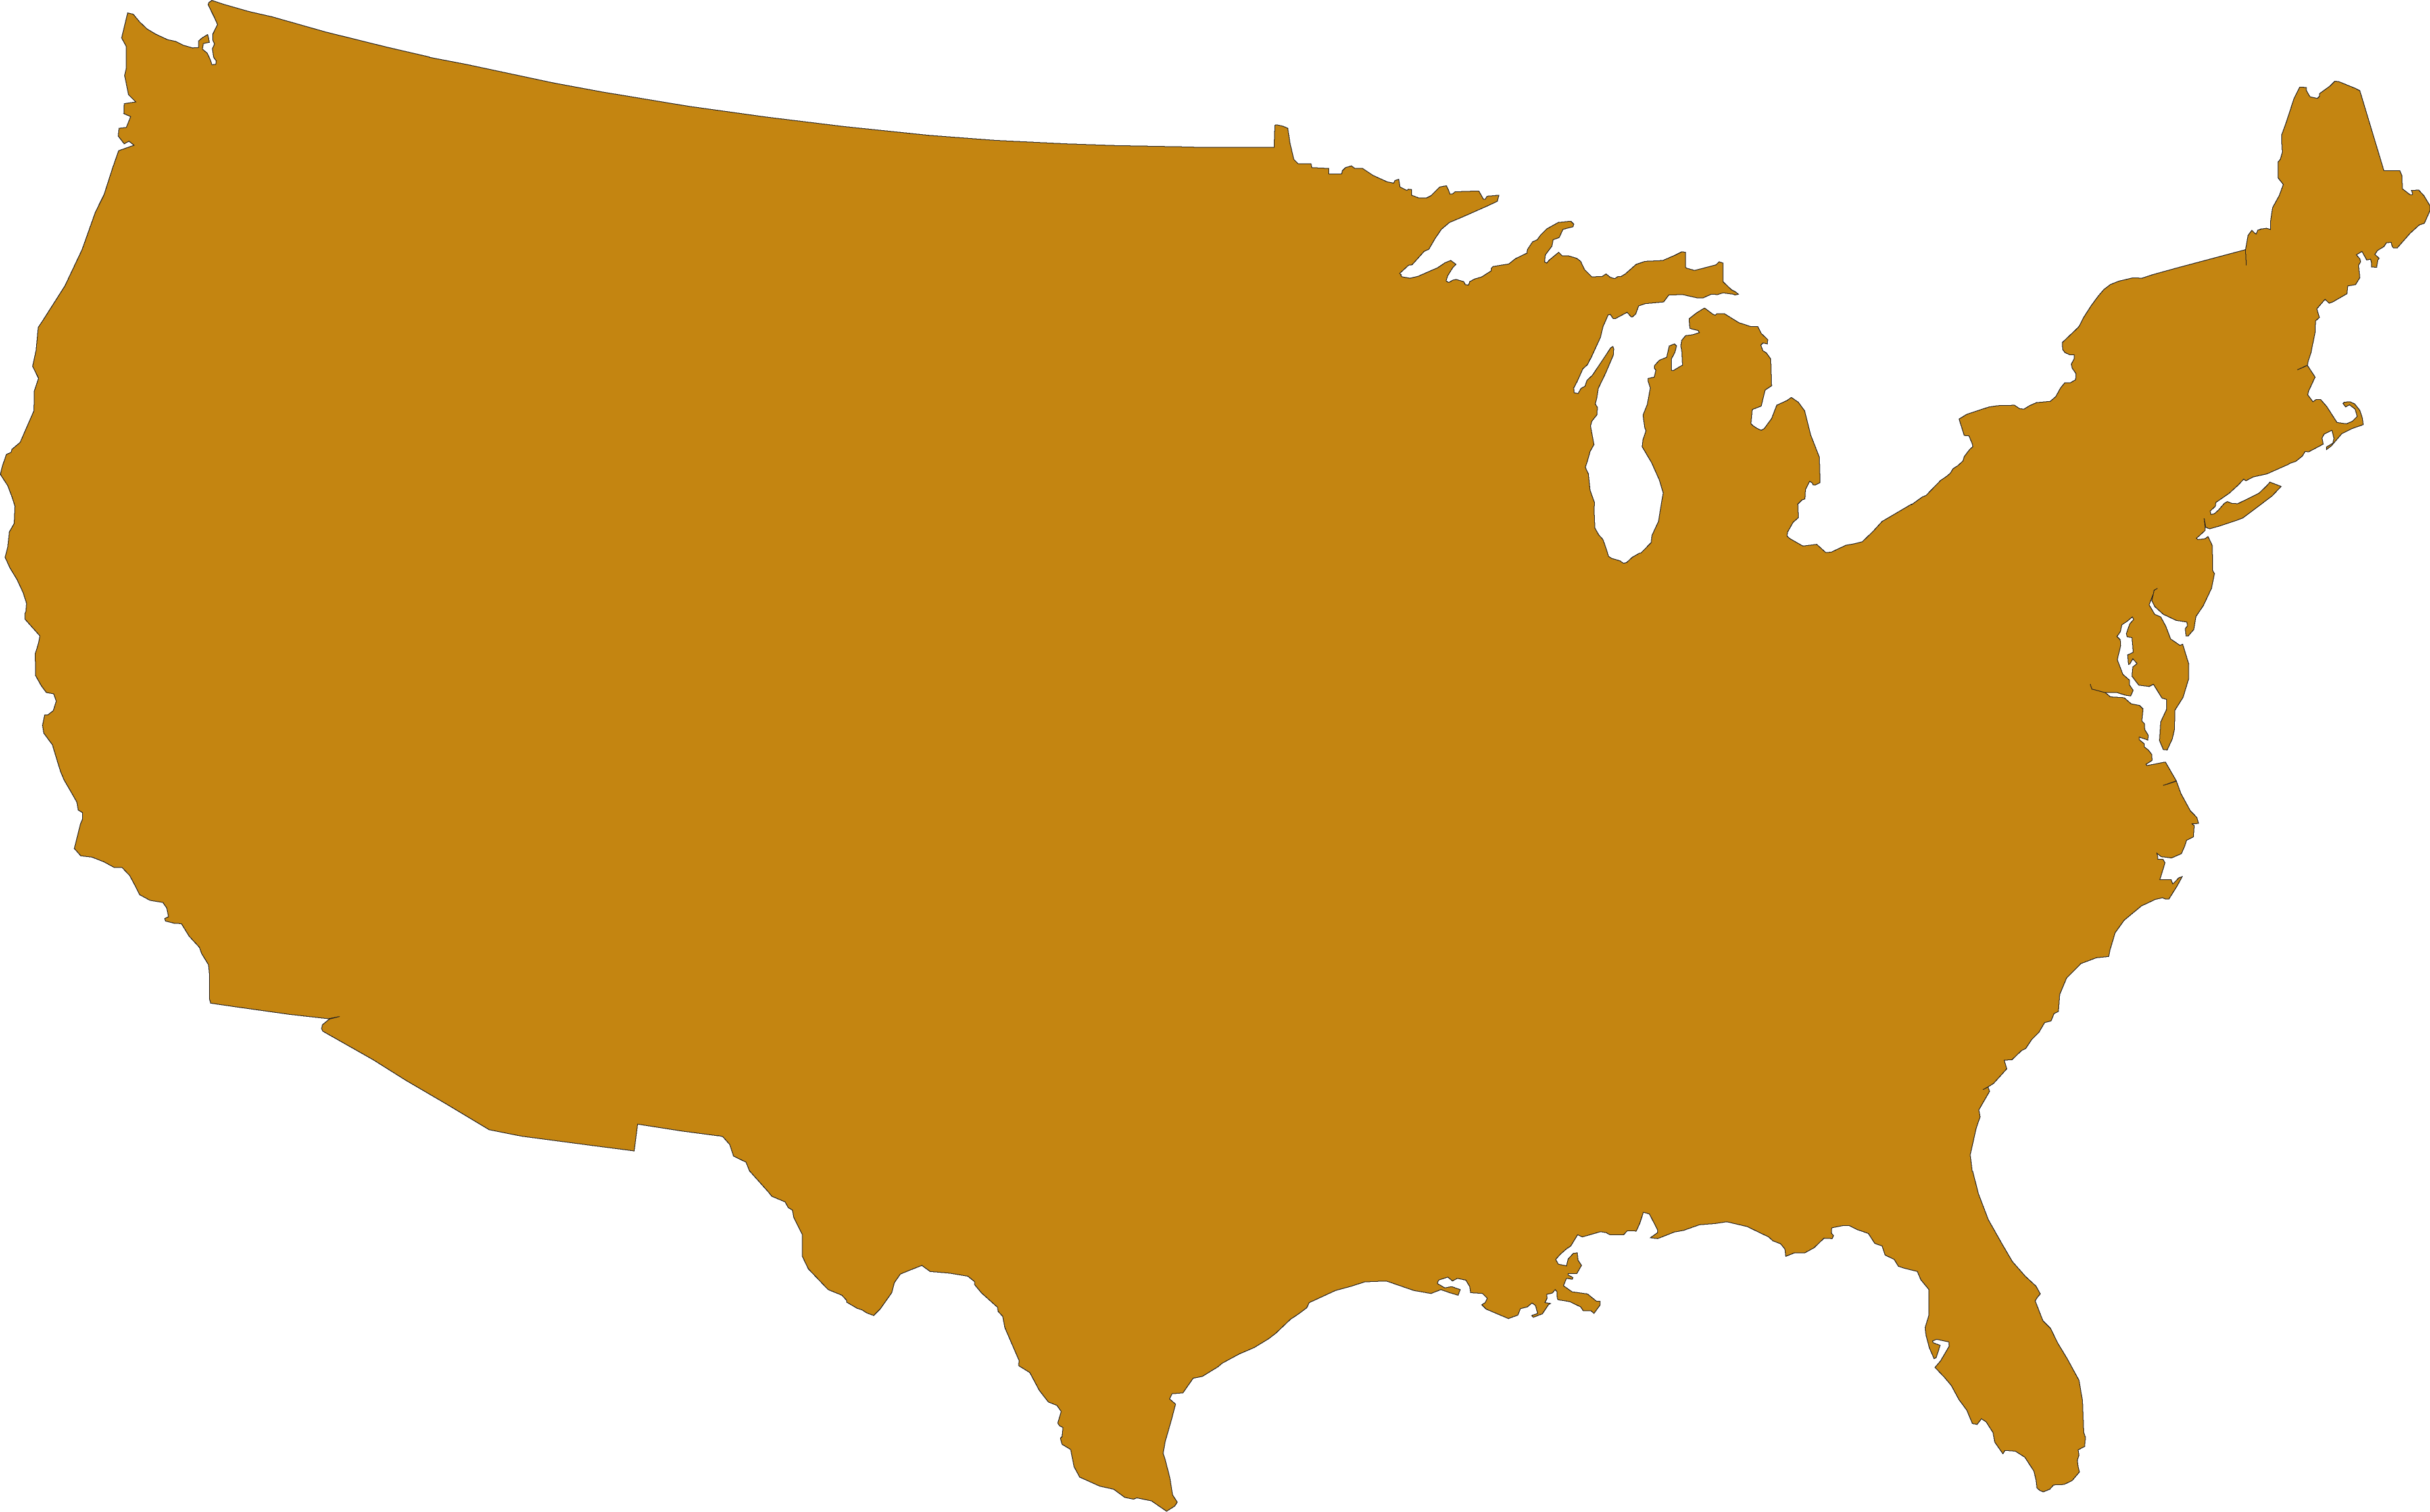 Us - States That Recognize The Armenian Genocide (3695x2299)